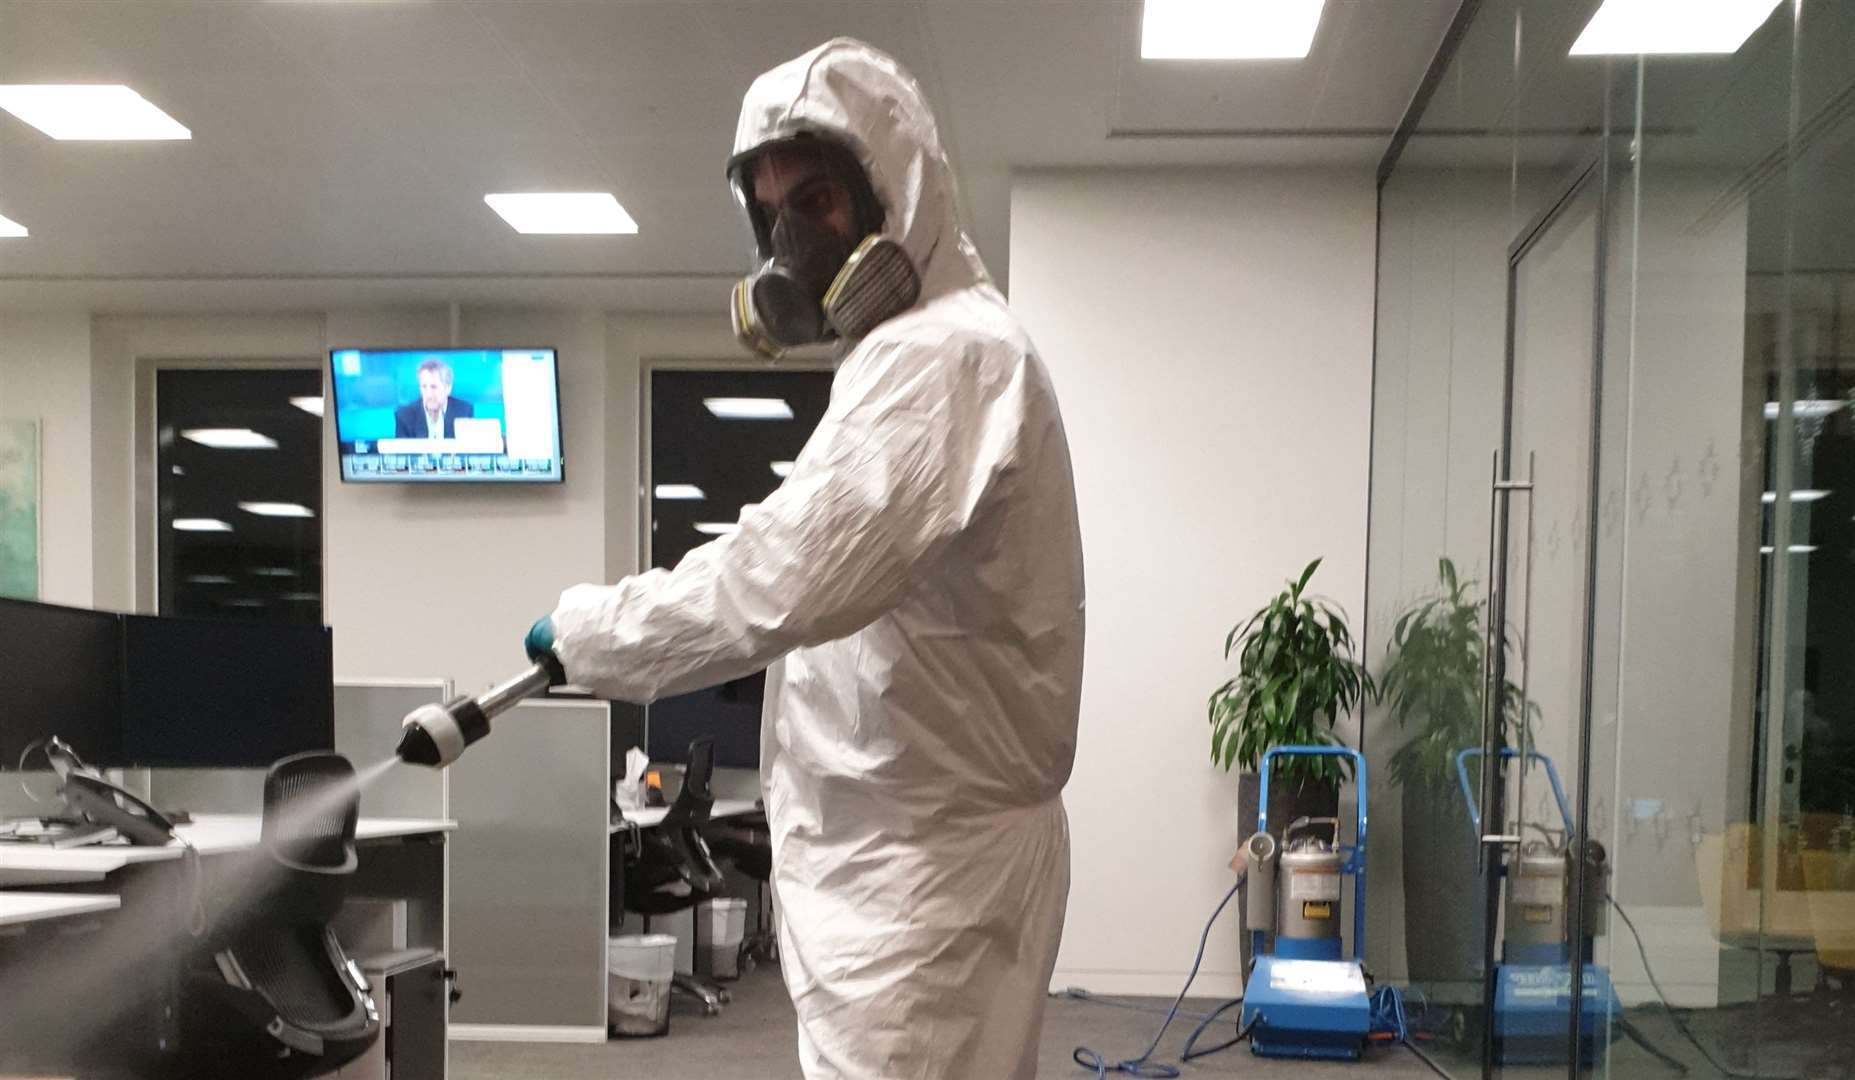 Adam Bourgeois wears protective clothing during cleaning. Credit: Ideal Response